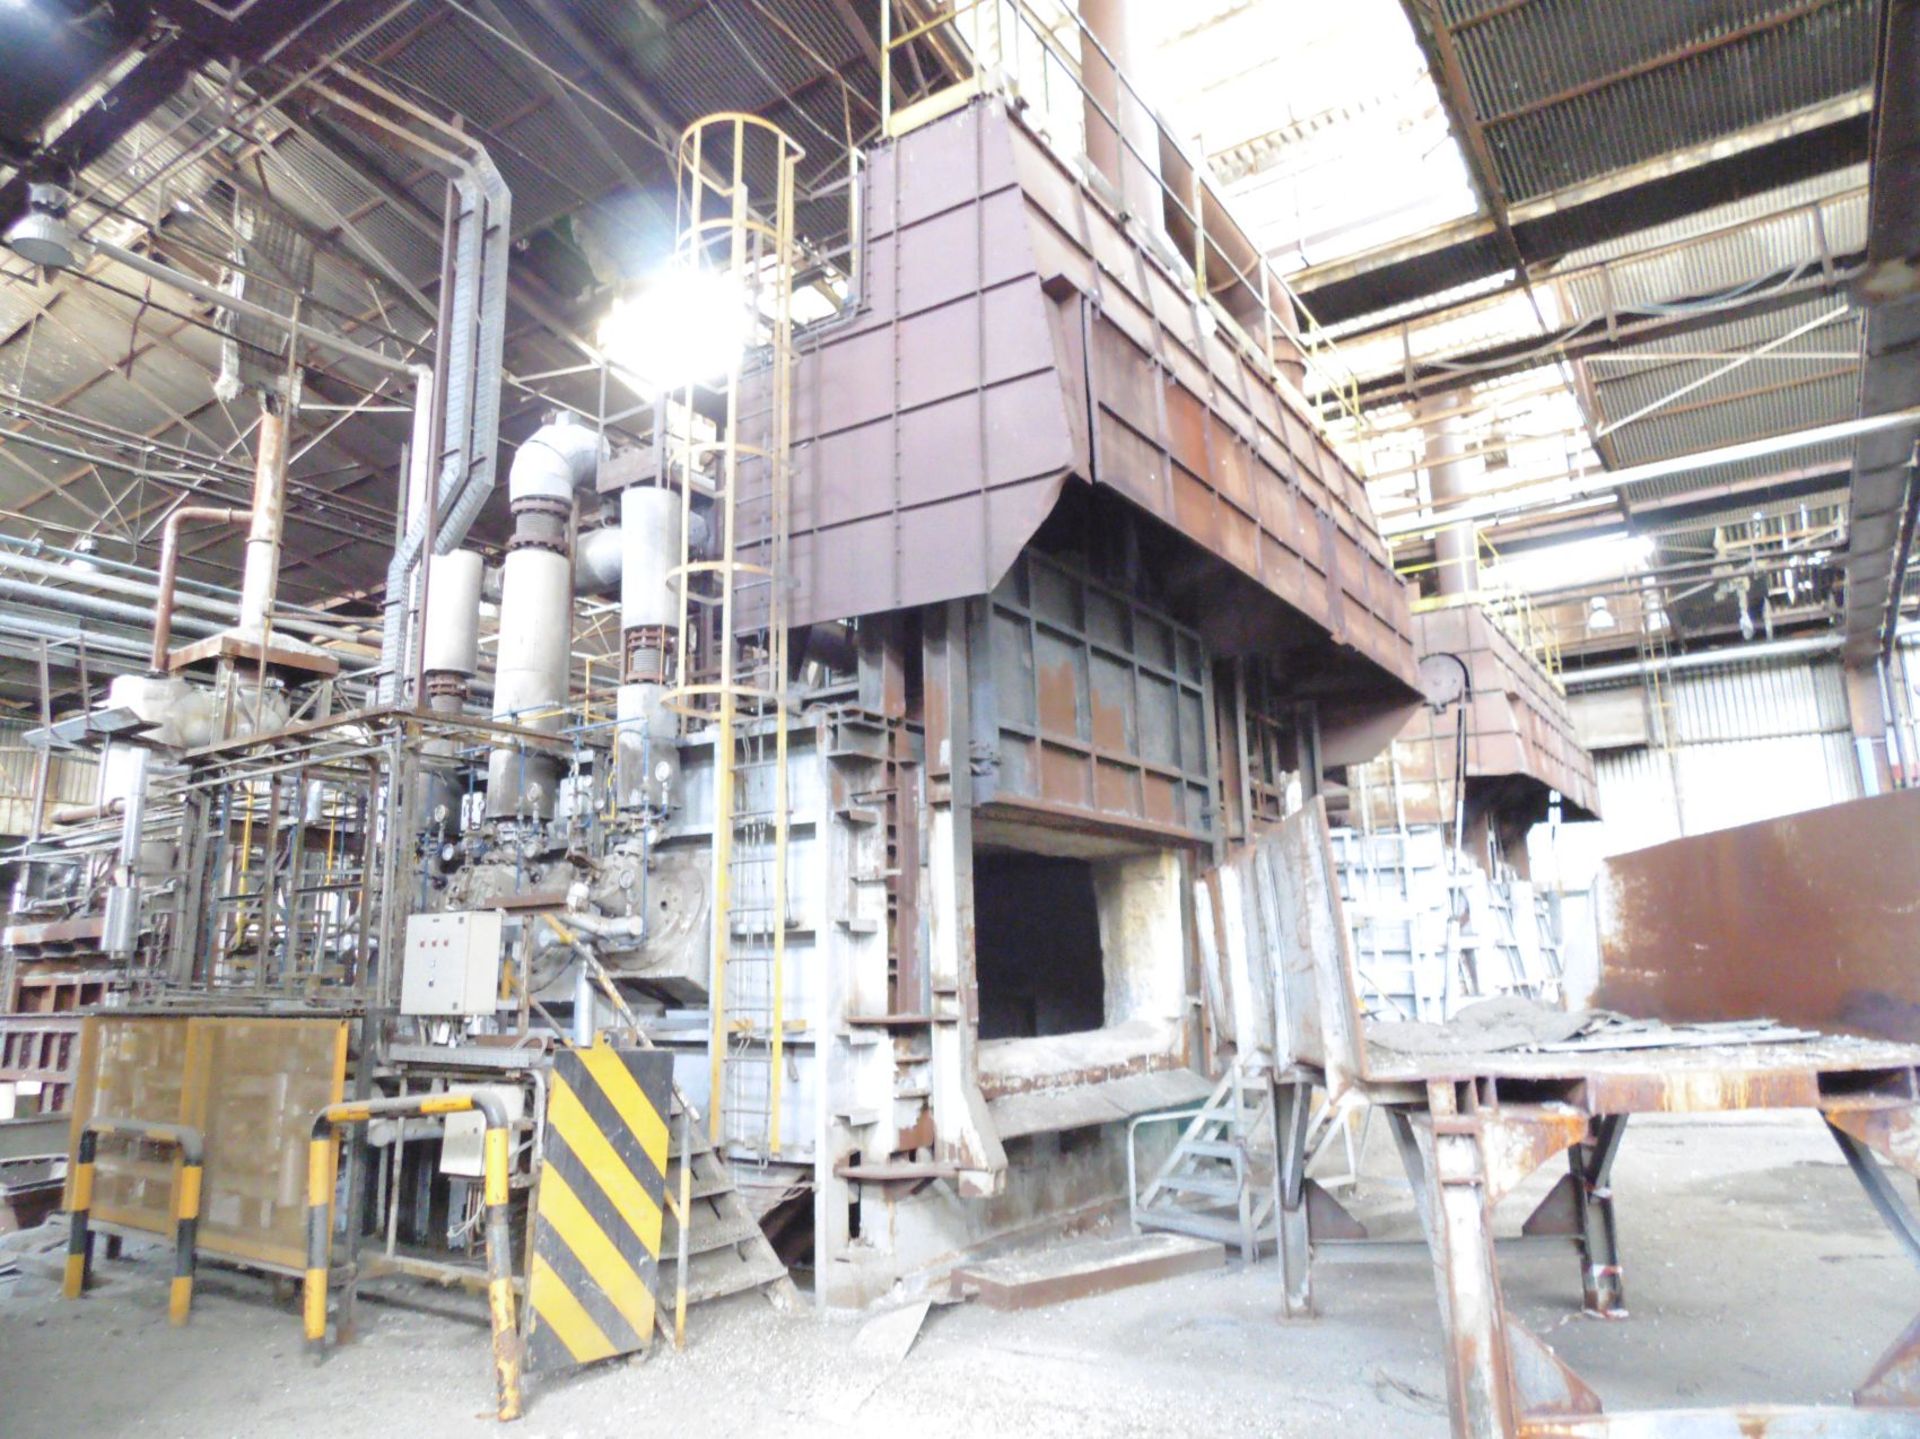 35 Ton and 30 Ton Aluminium Melting Furnaces; both with Low Sulphur Oil Burner Combustion Systems - Image 5 of 6